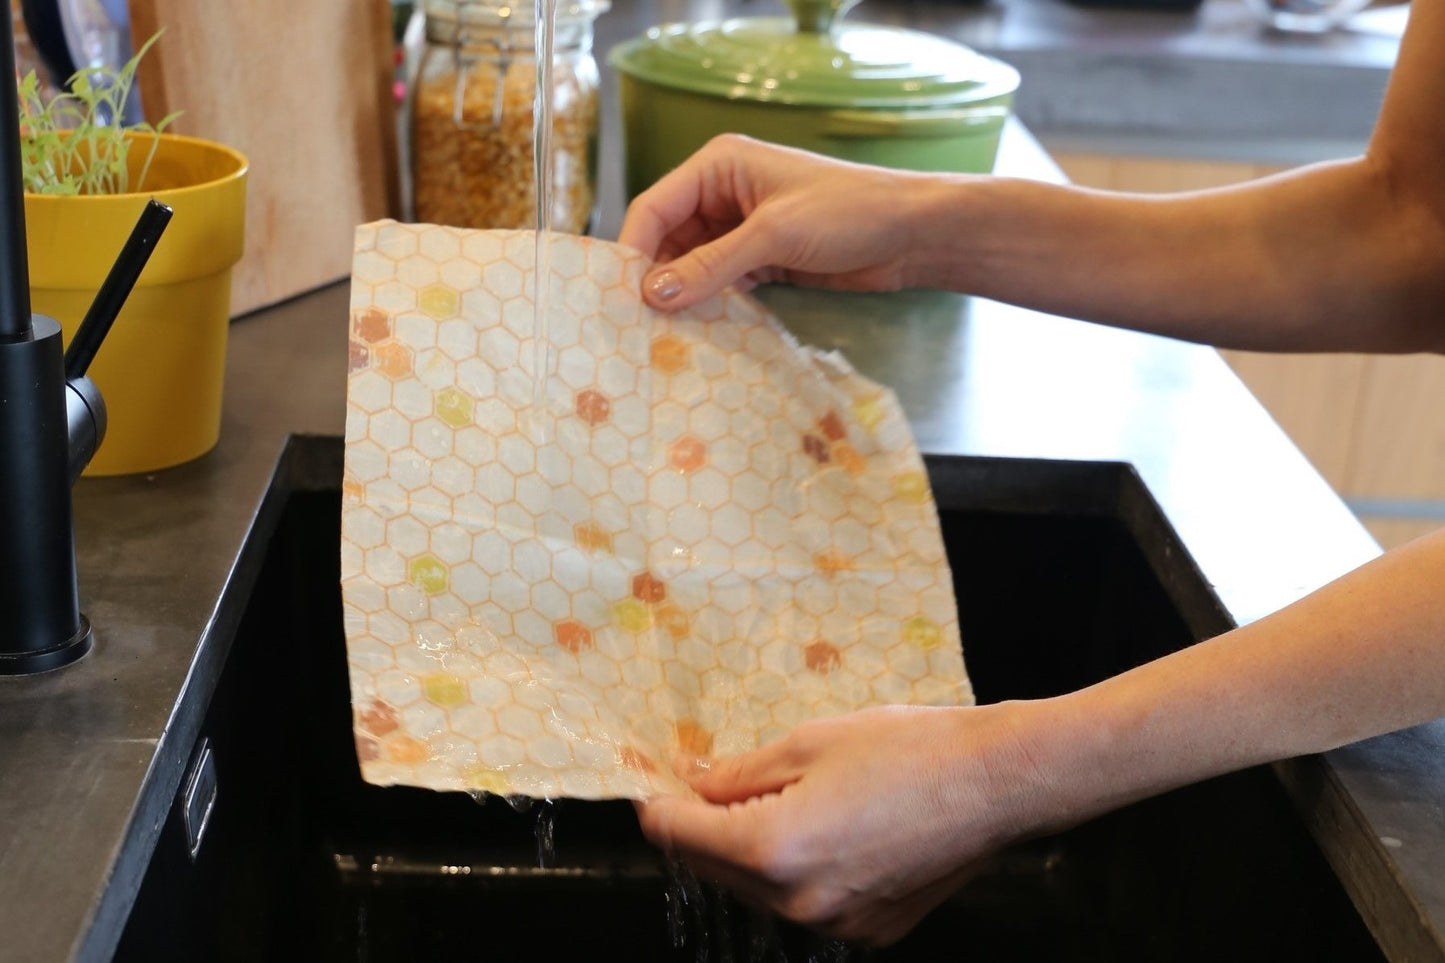 beeswax food wrap hive pattern from beewise amsterdam being washed with water and a mild soap